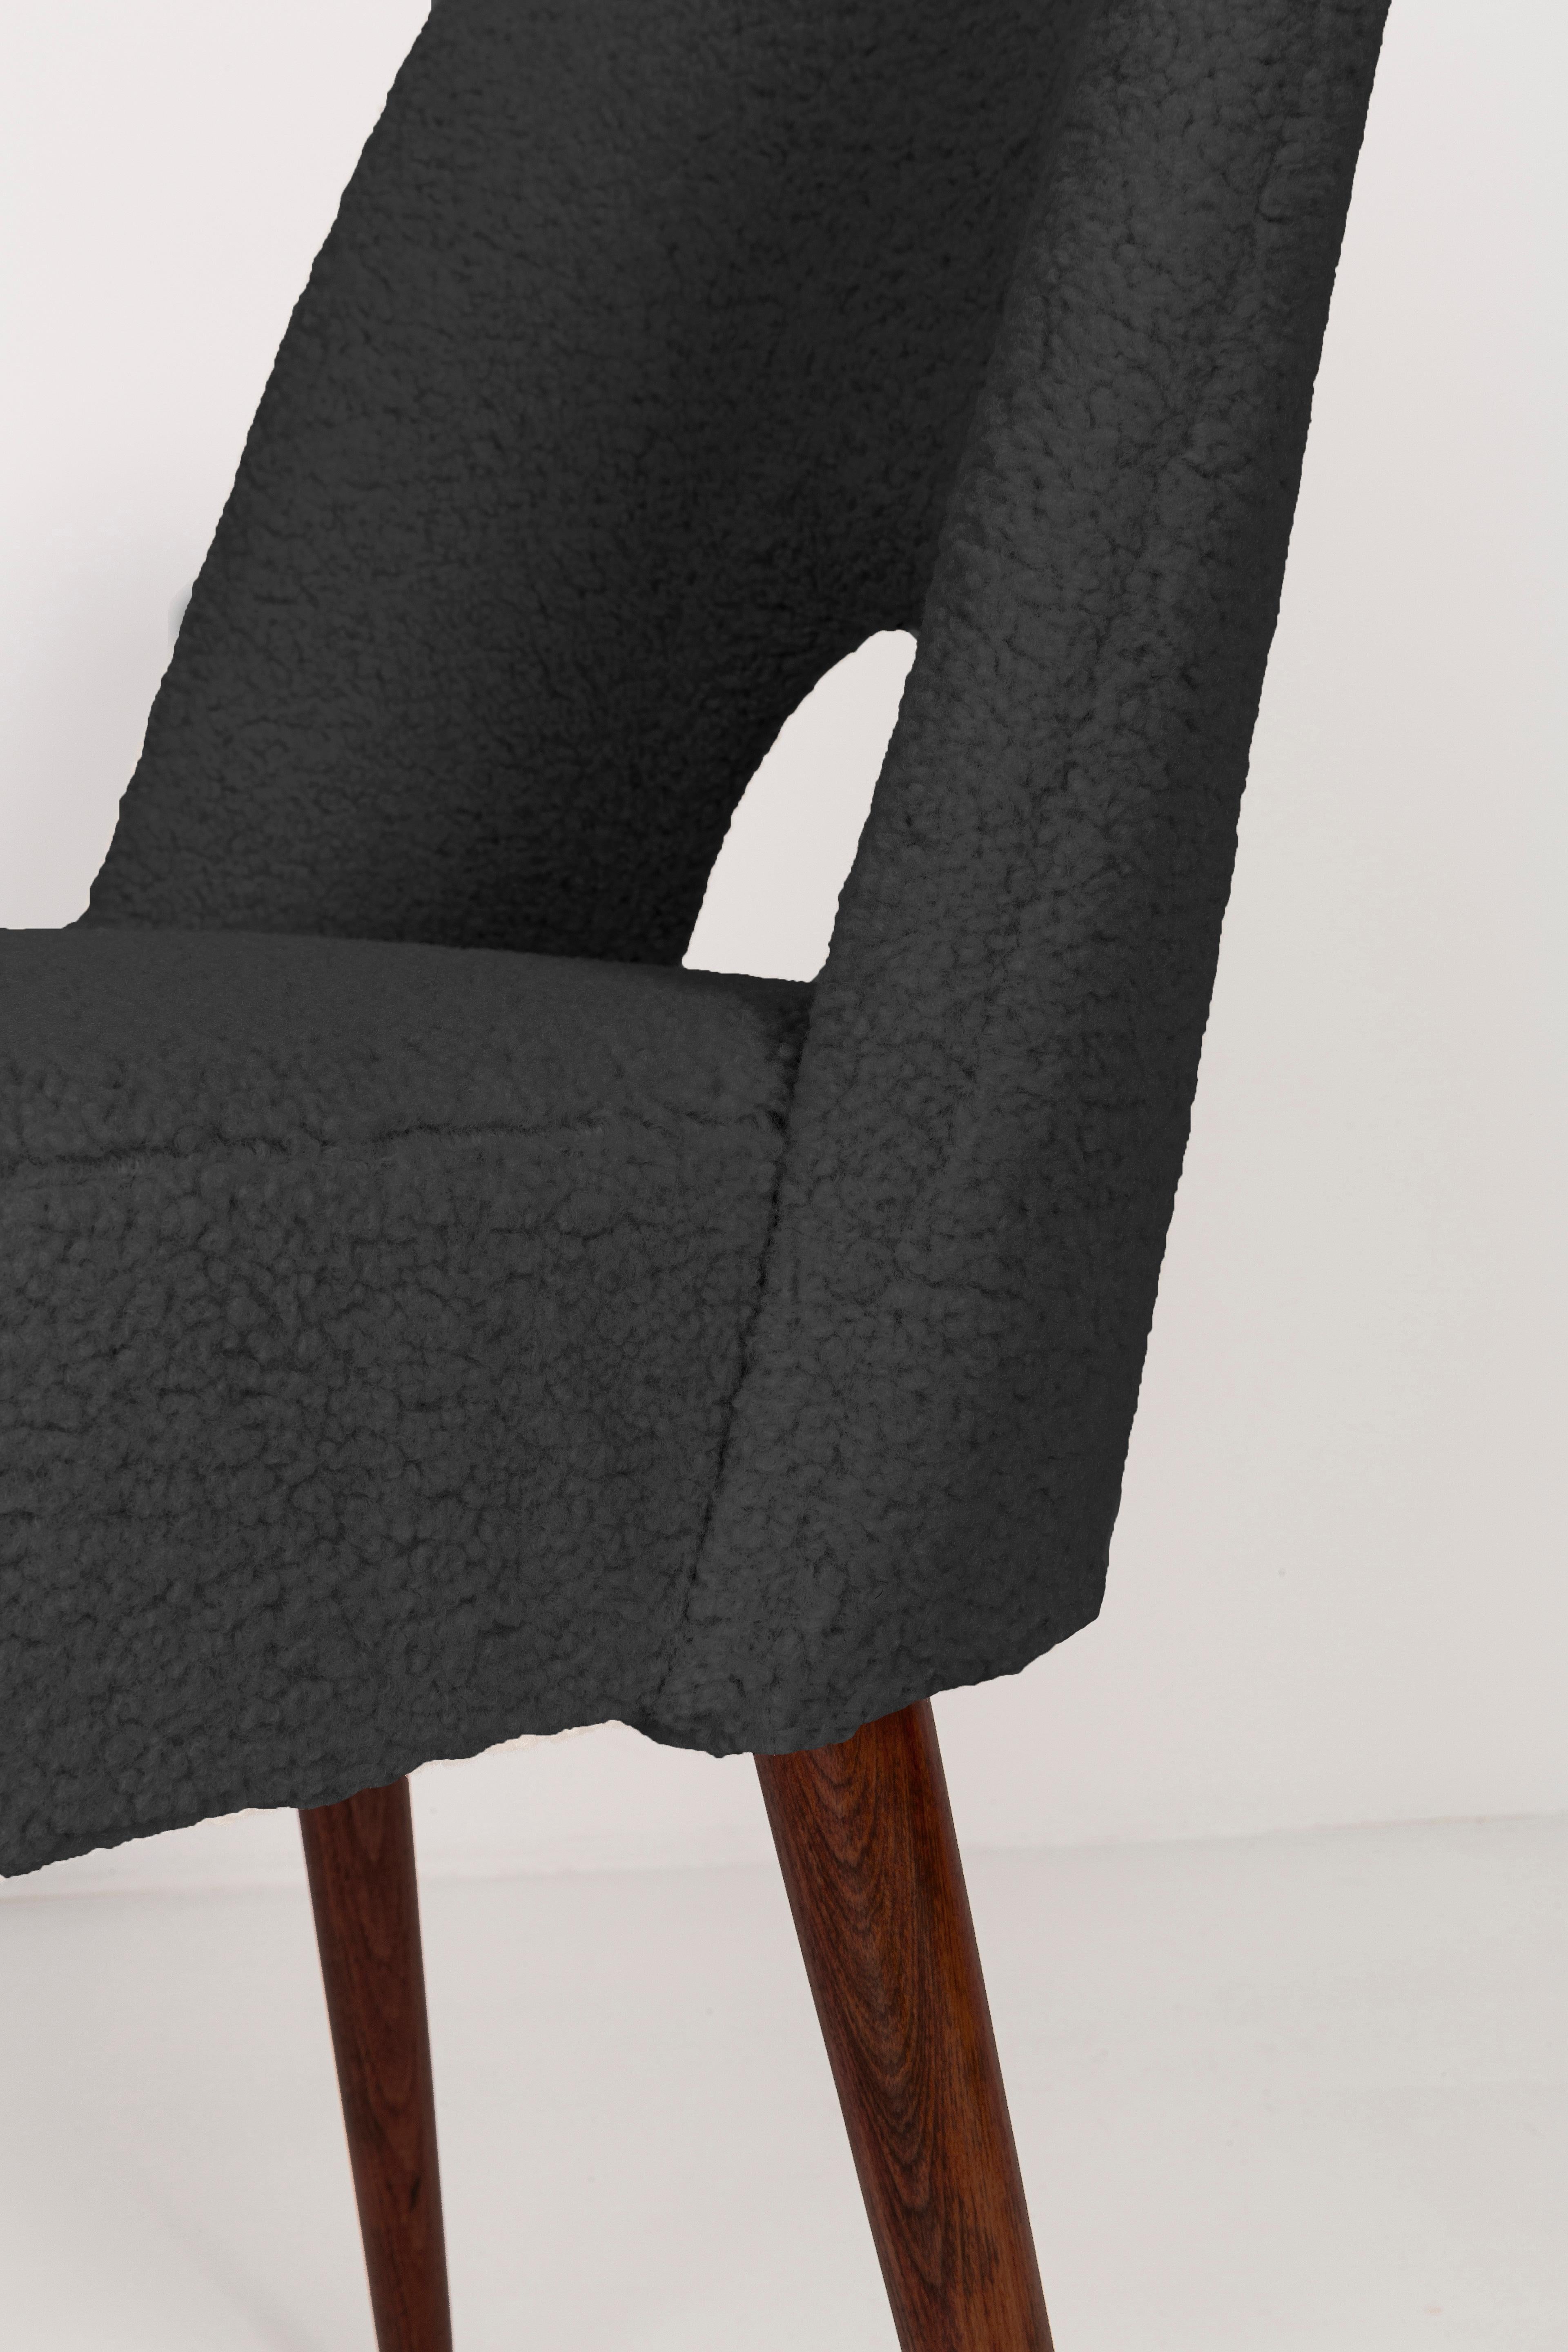 Set of Six Dark Gray Boucle 'Shell' Chairs, 1960s For Sale 1